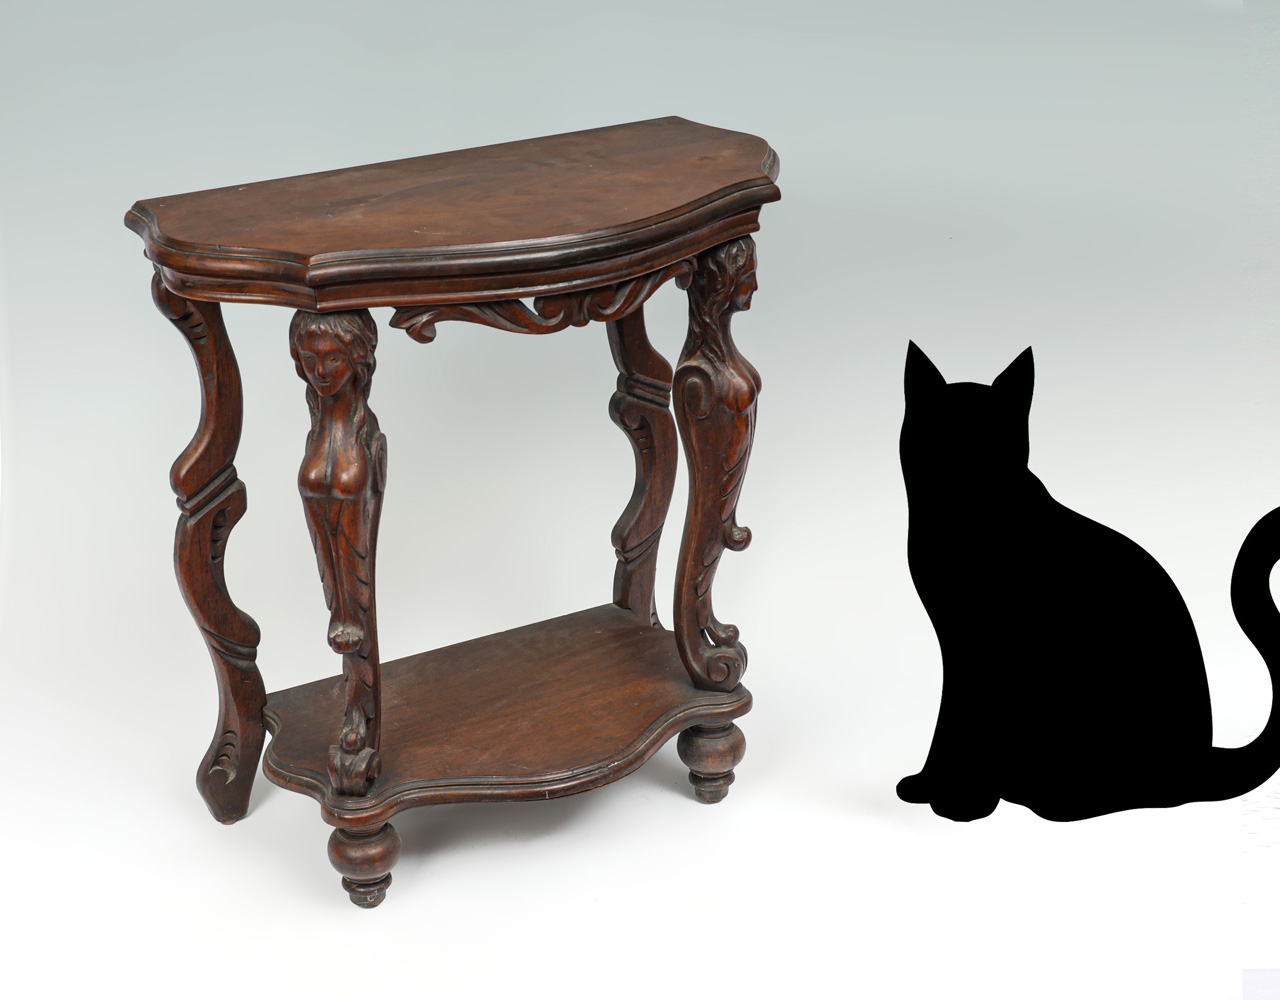 FIGURAL CARVED HALL TABLE: Carved